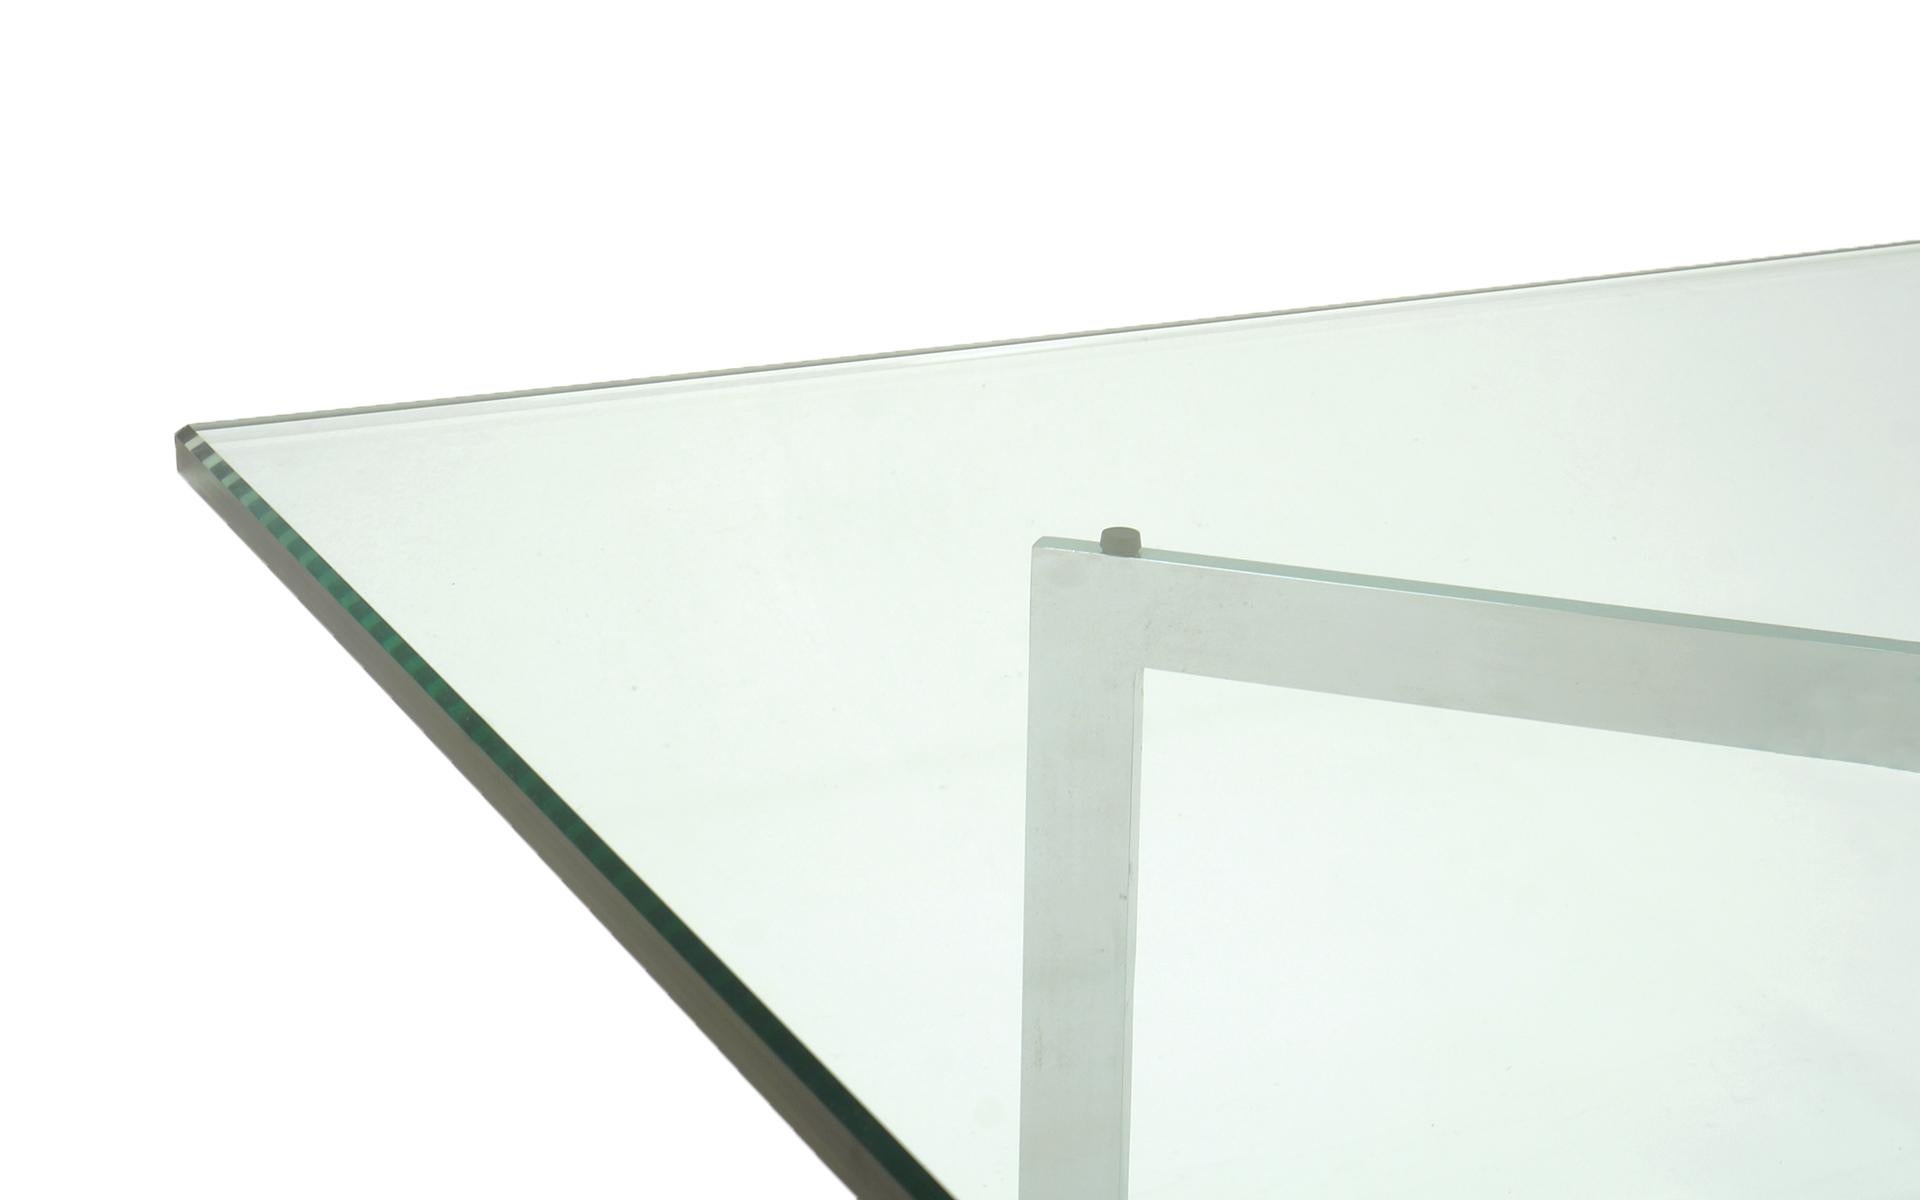 Mid-Century Modern Barcelona Glass and Chrome Coffee Table, Style of Mies van der Rohe for Knoll